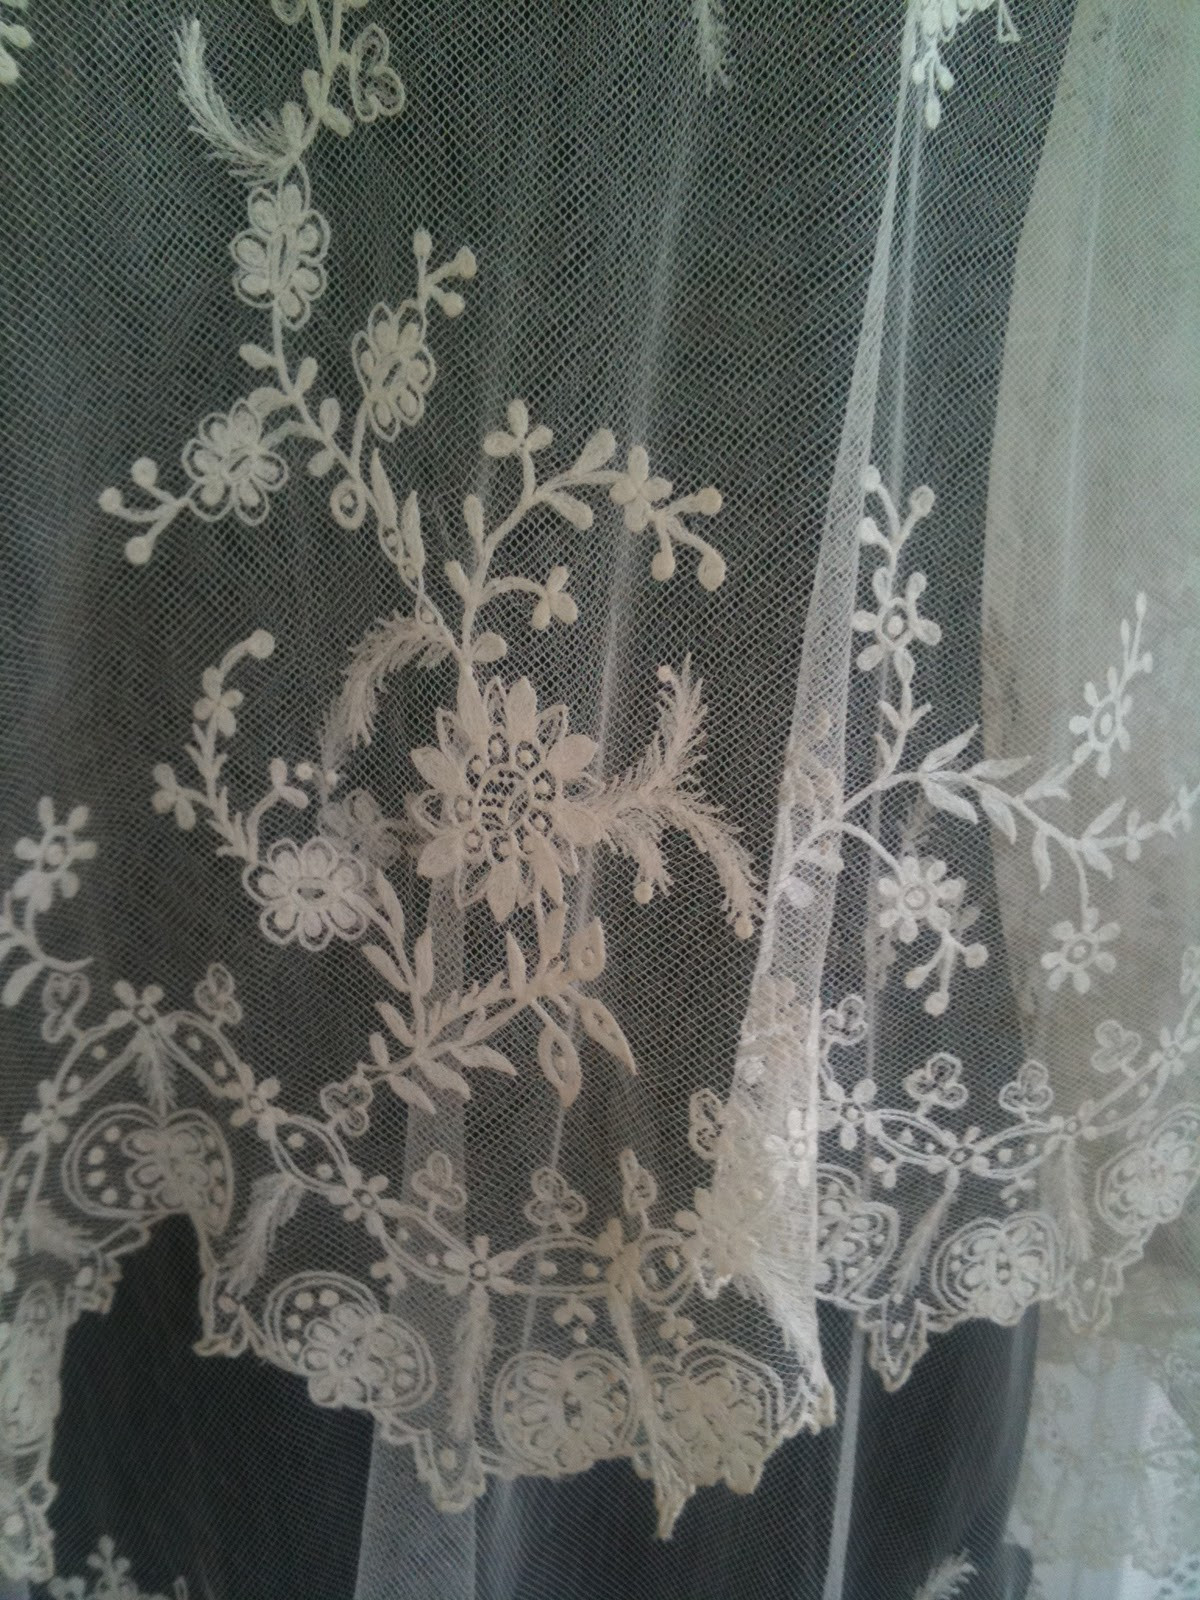 Vintage Wedding Veils For Sale
 Rosemary Cathcart Antique Lace and Vintage Fashion